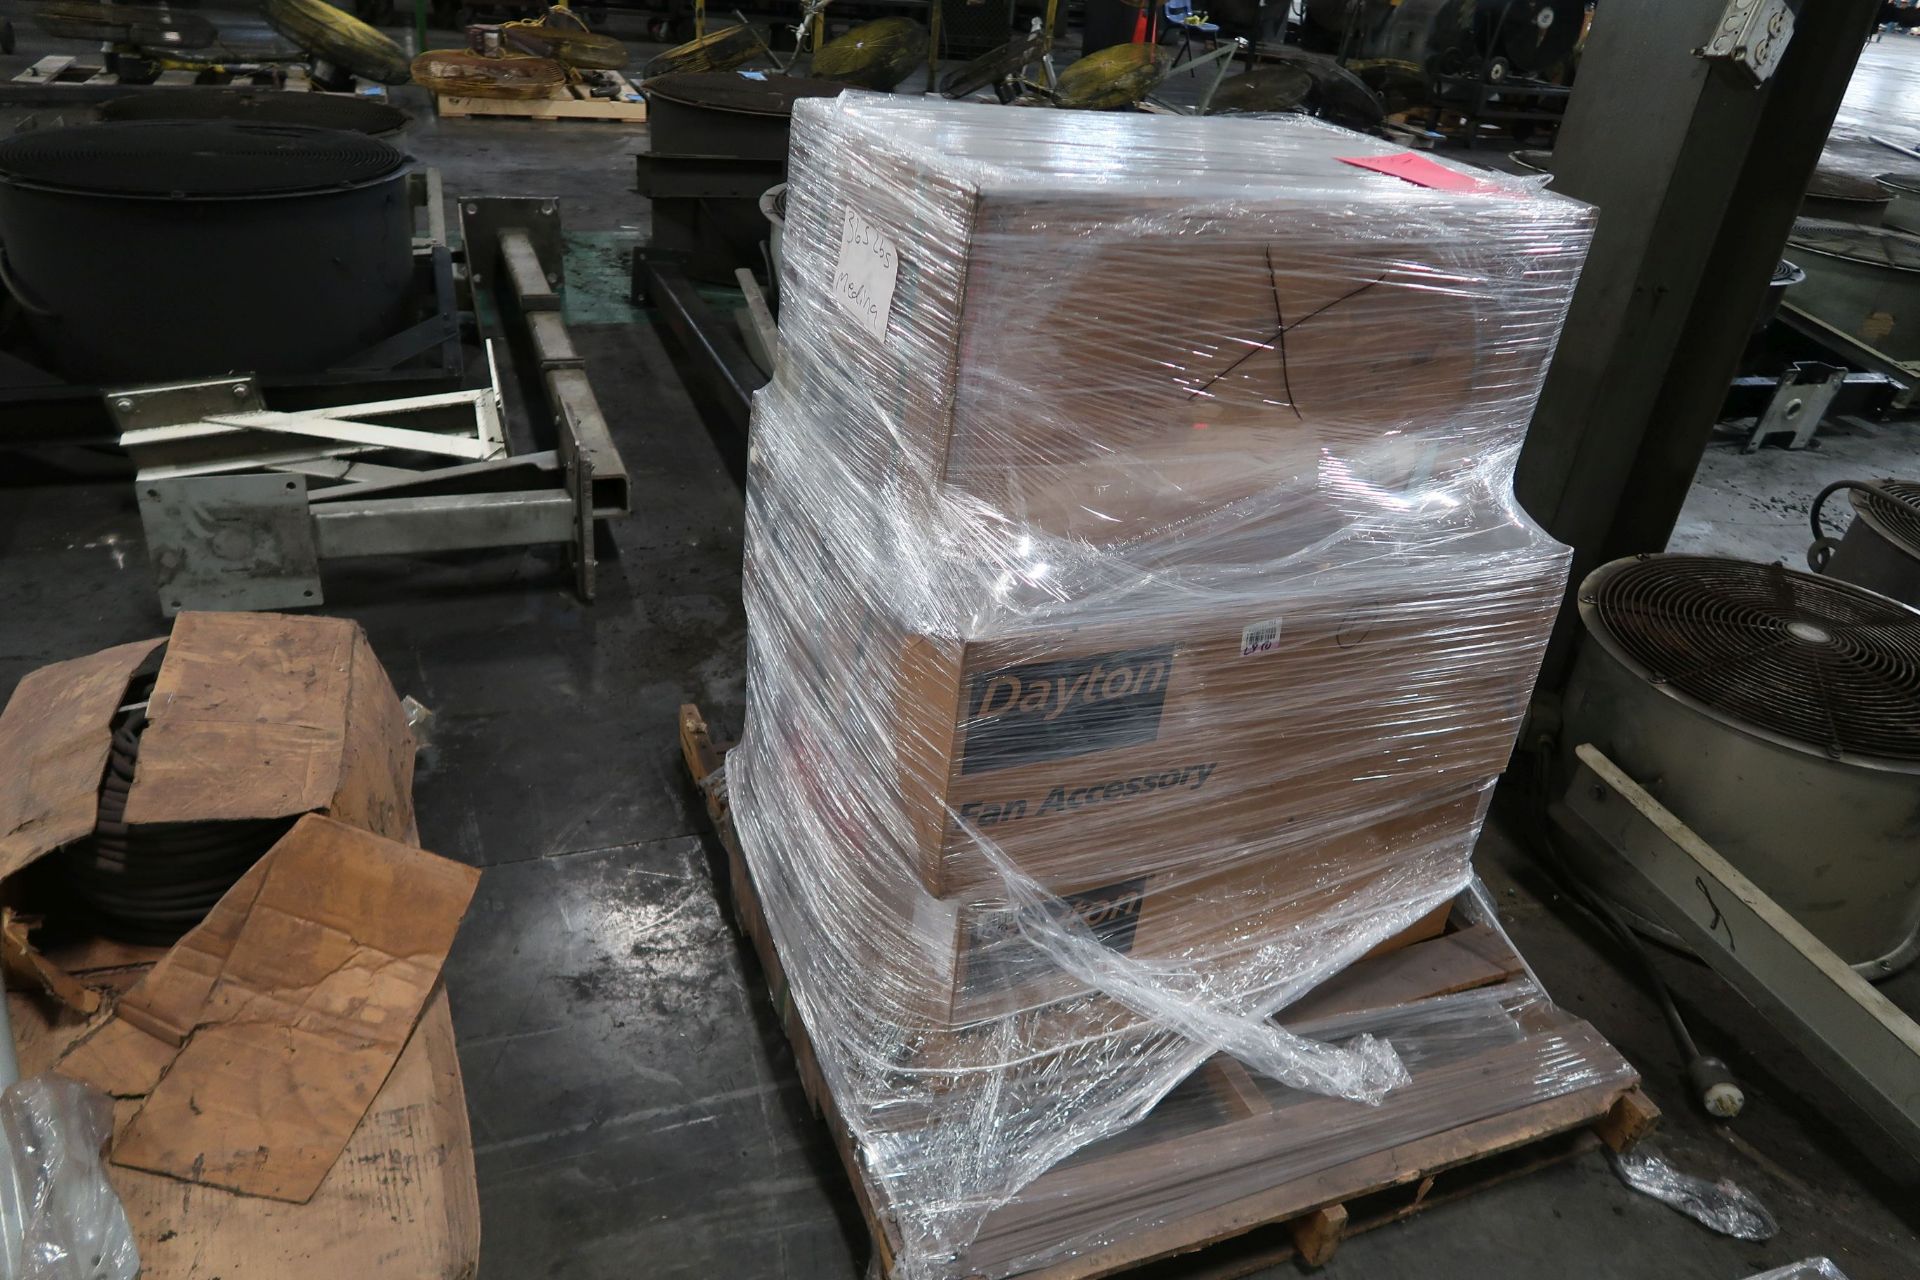 SKIDS FAN ACCESSORIES **LOADING PRICE DUE TO ERRA - $50.00** - Image 3 of 5